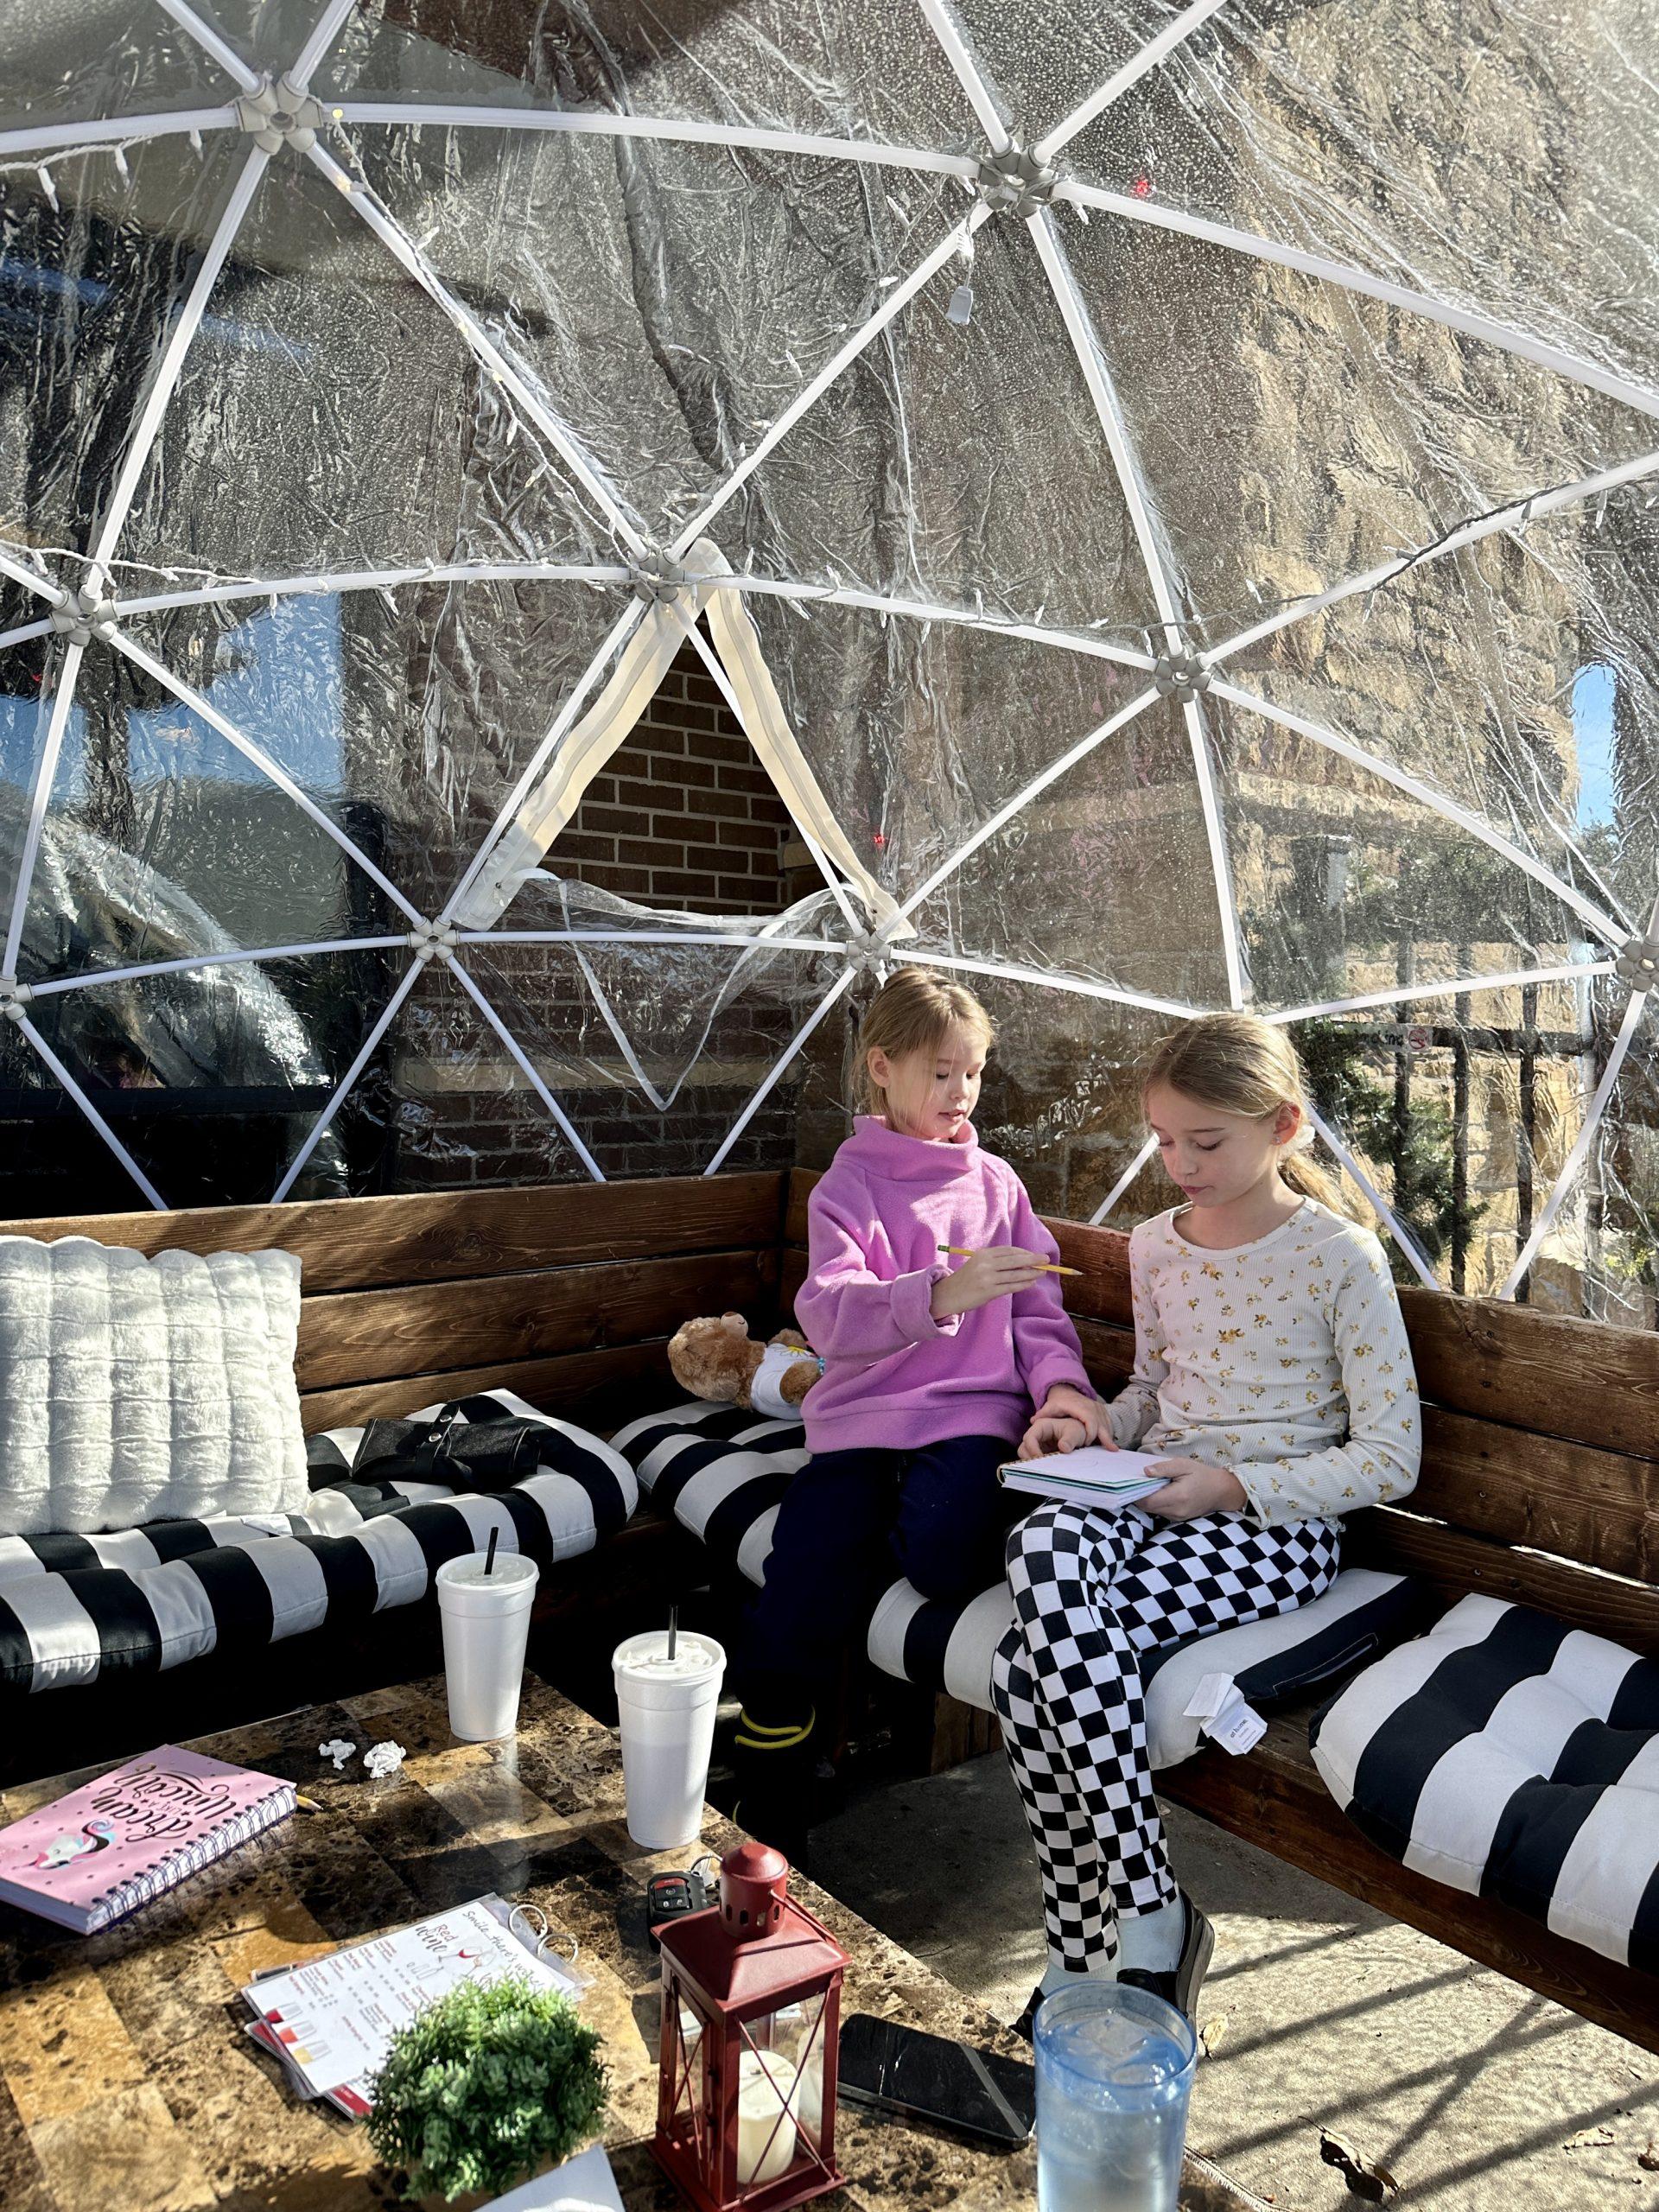 Nortons Brewing Company's garden igloos are back for a unique outdoor  experience